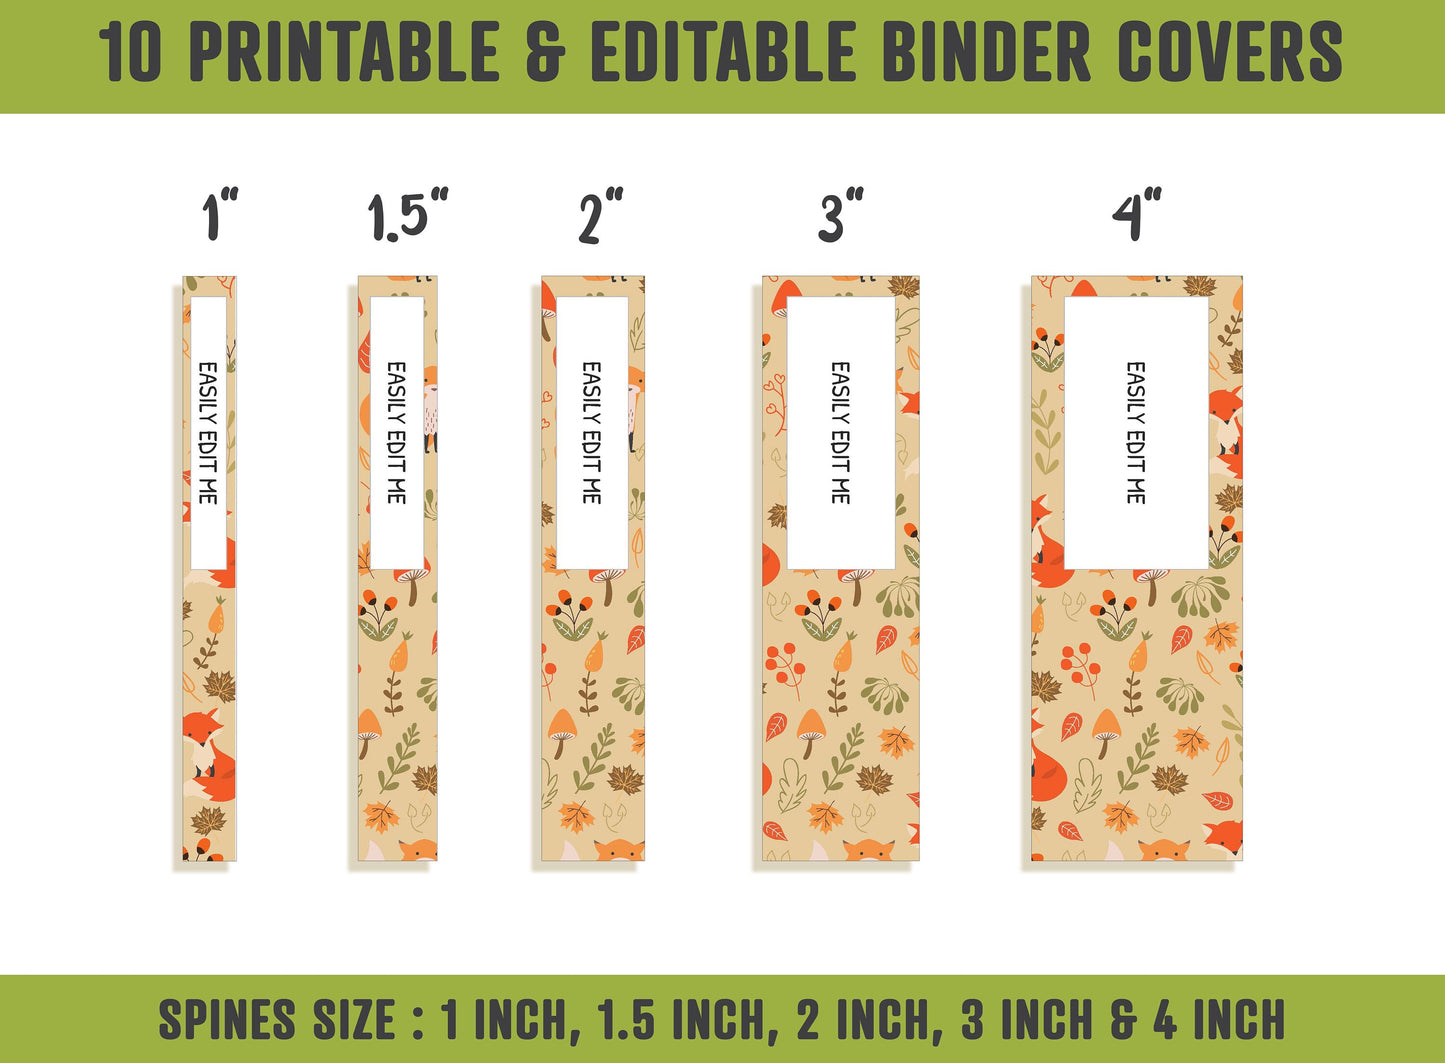 Autumn Patterns with Flowers and Animals Binder Cover, 10 Printable & Editable Binder Covers+Spines, Binder Inserts, Teacher/School Planner